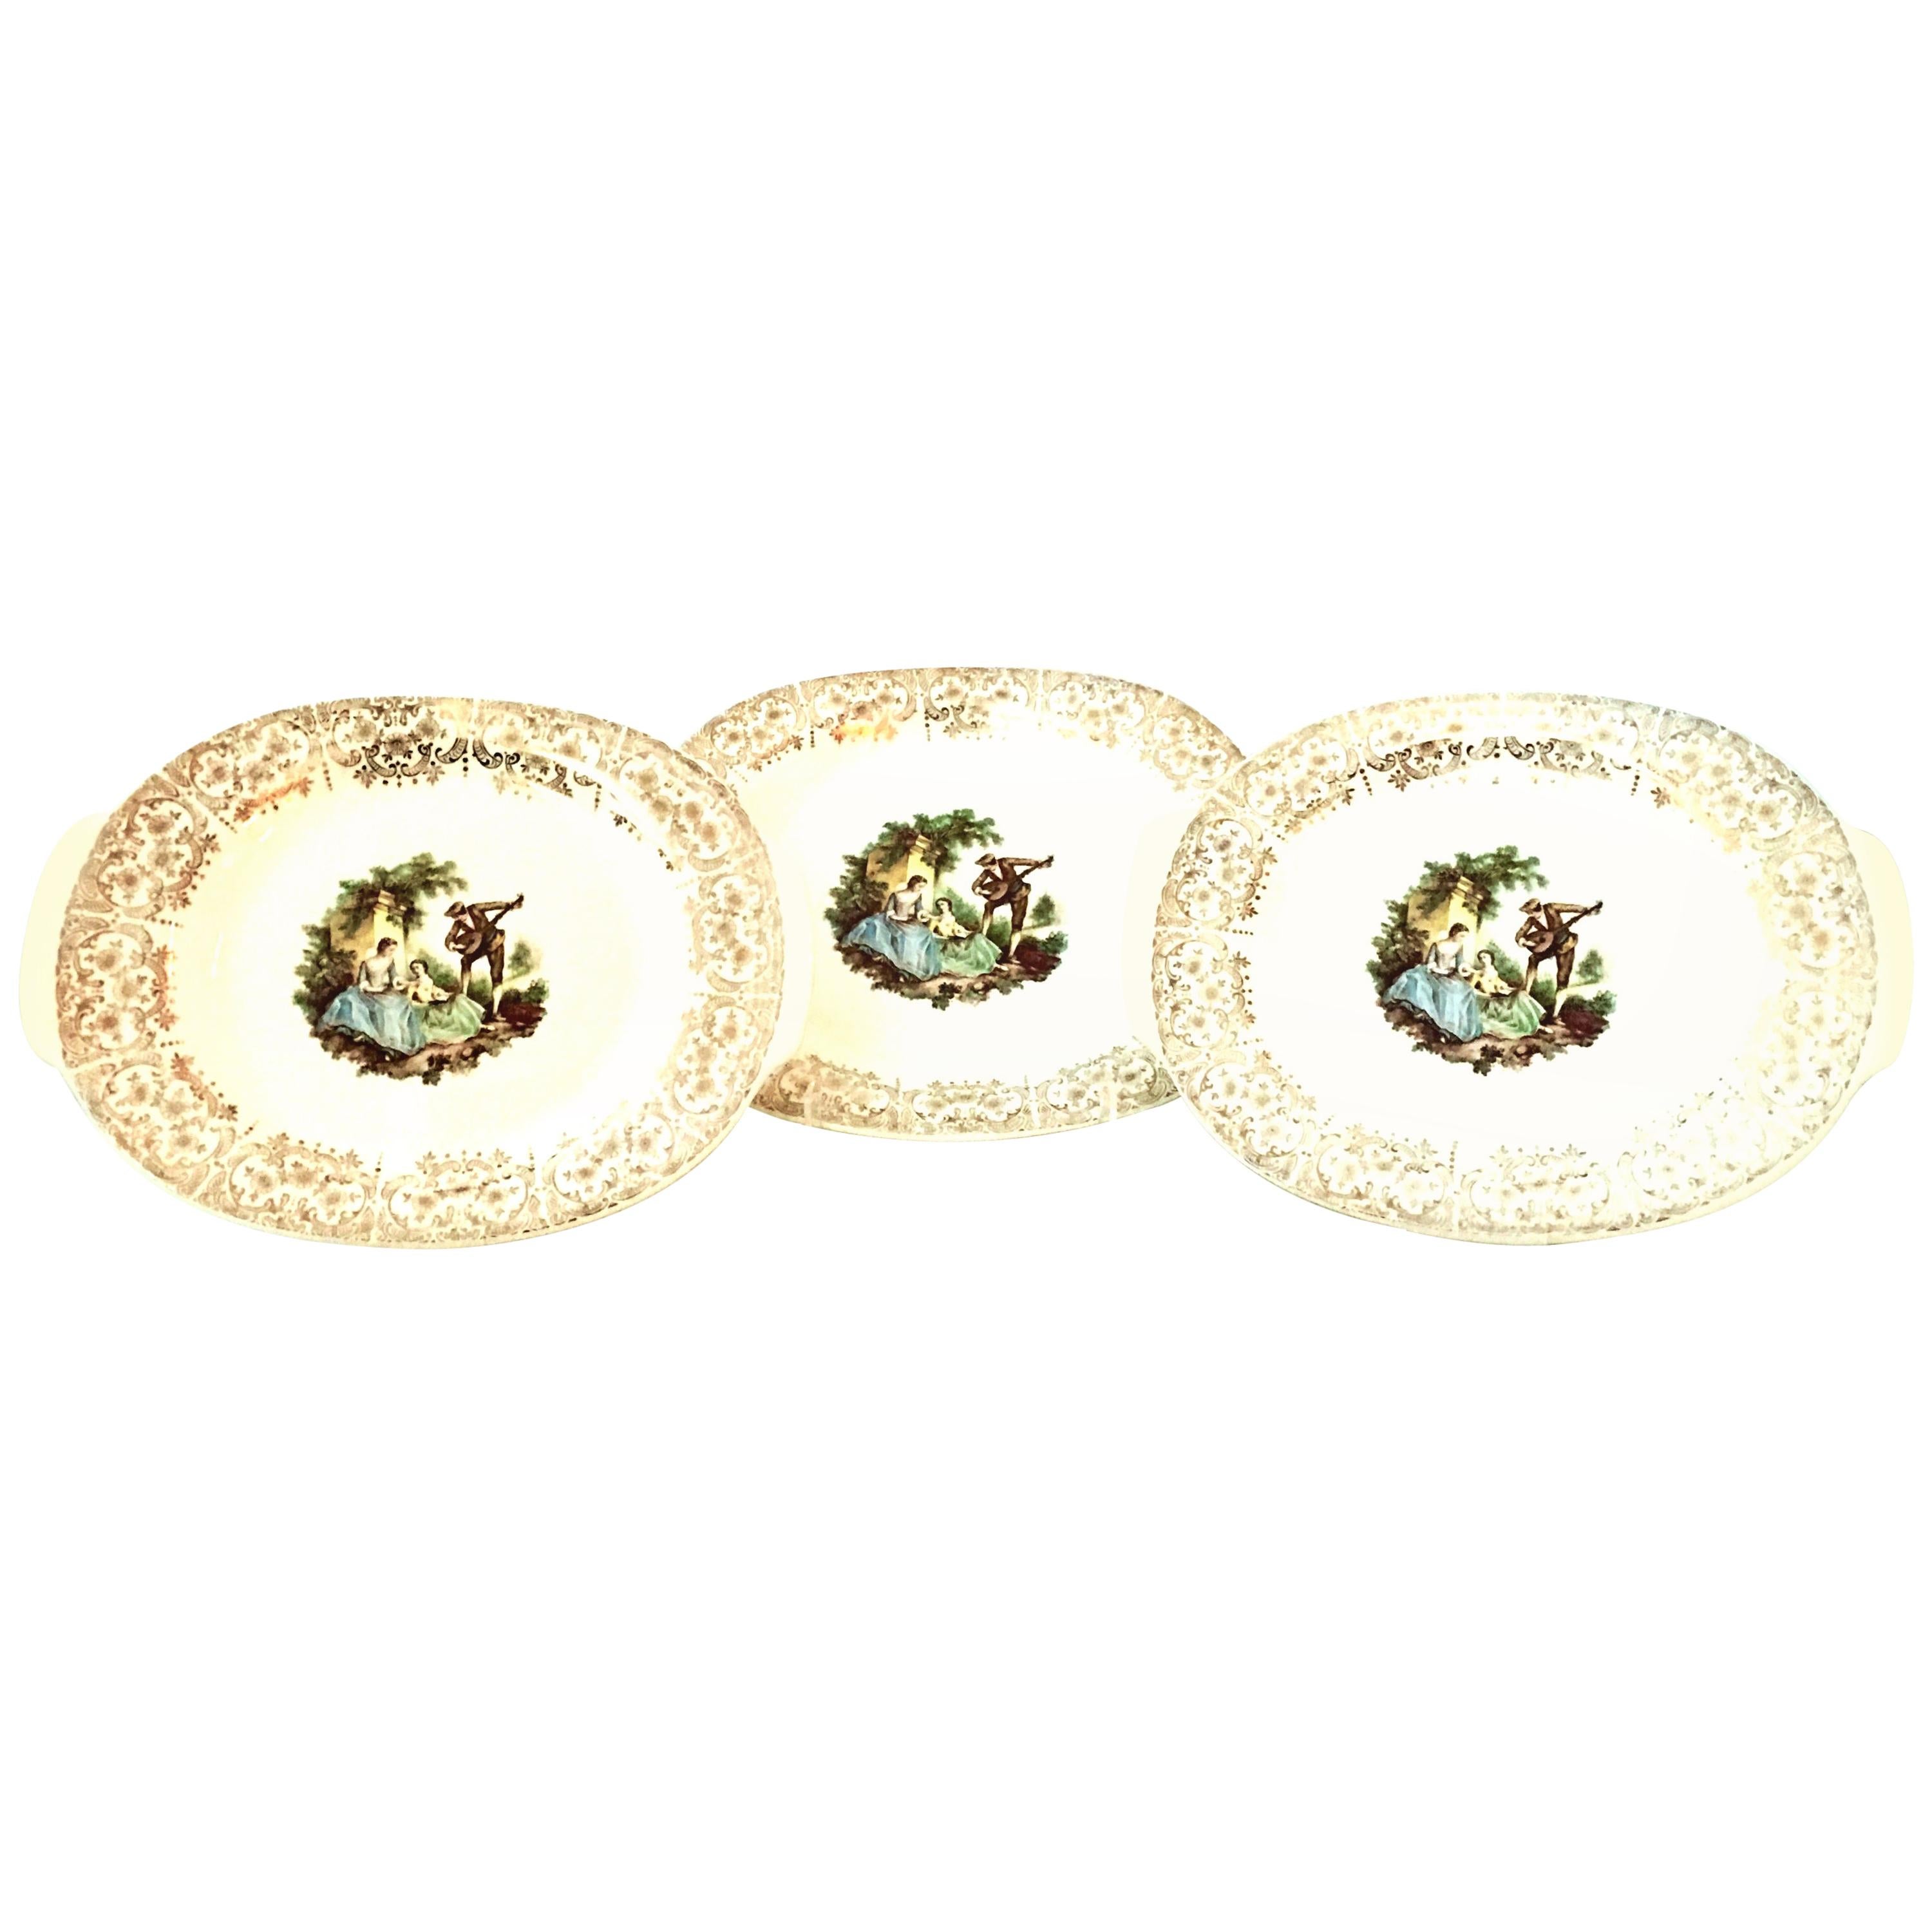 1940s American Limoges Ceramic and 22-Karat Gold Set of Three Serving Platters For Sale